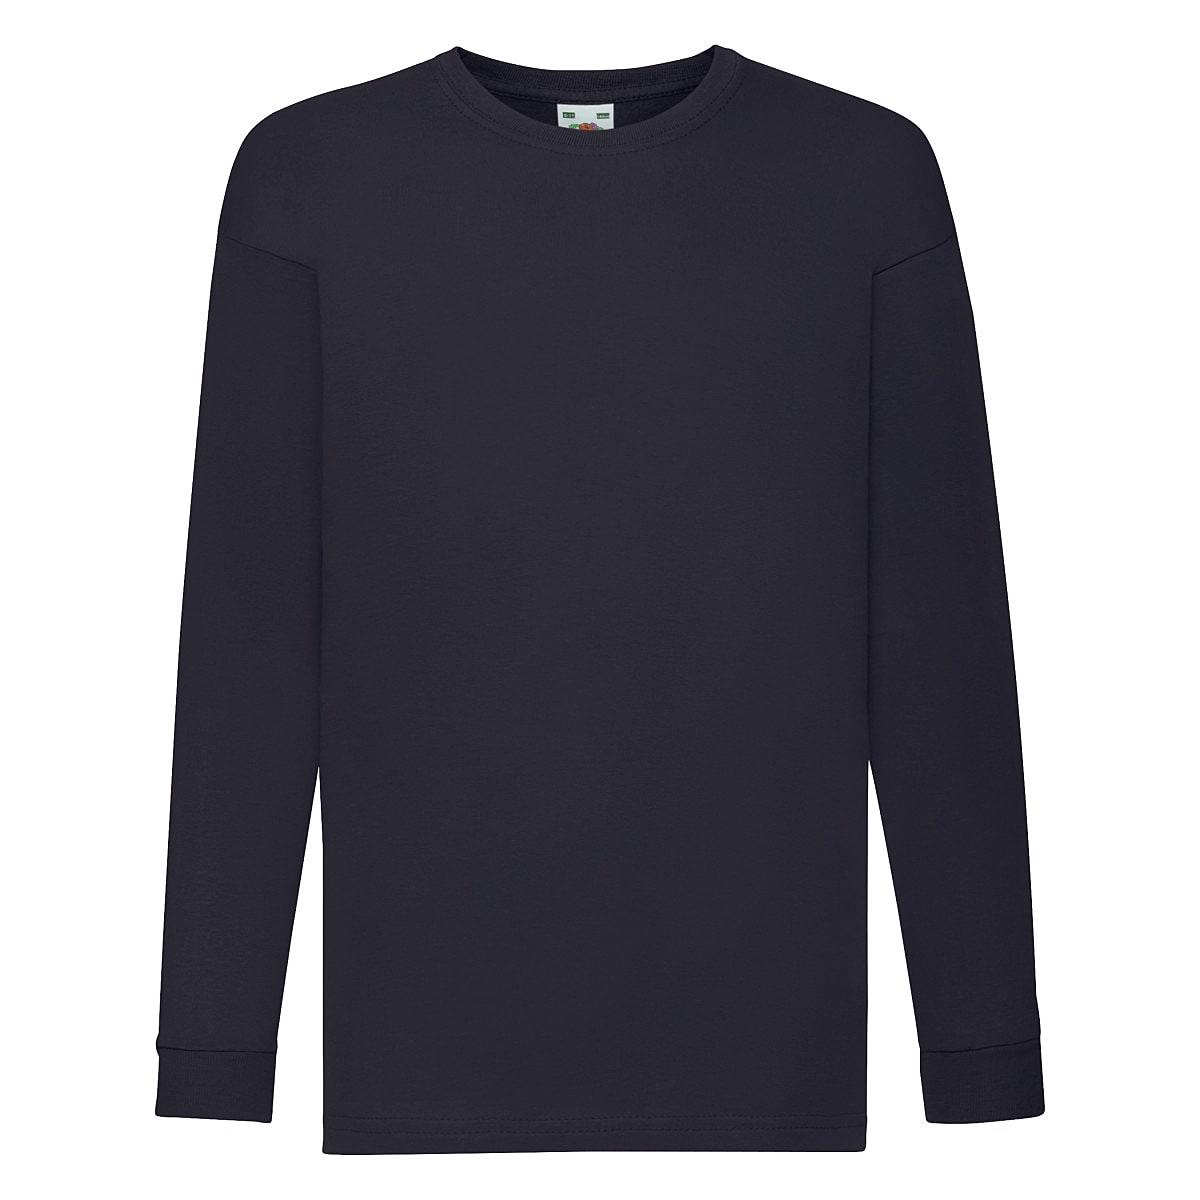 Fruit Of The Loom Childrens Valuweight Long-Sleeve T-Shirt in Deep Navy (Product Code: 61007)